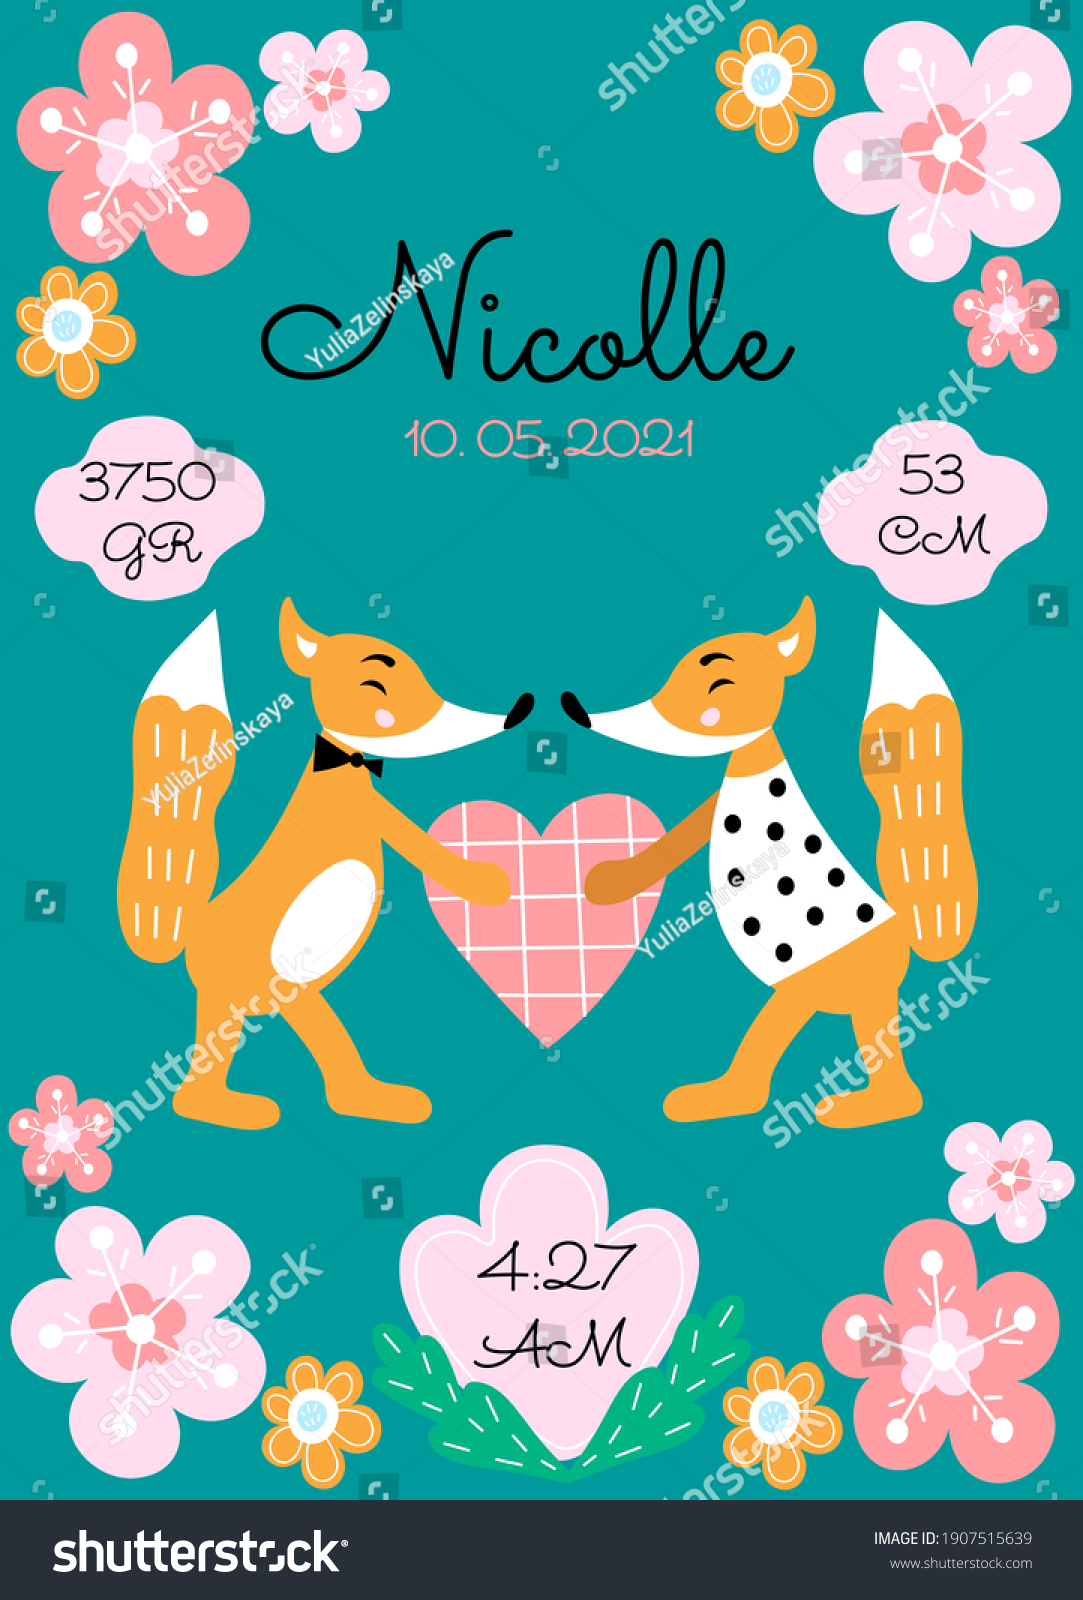 SVG of Personalize newborn baby metric poster with cute foxes and heart. Date, cm, gr, time svg